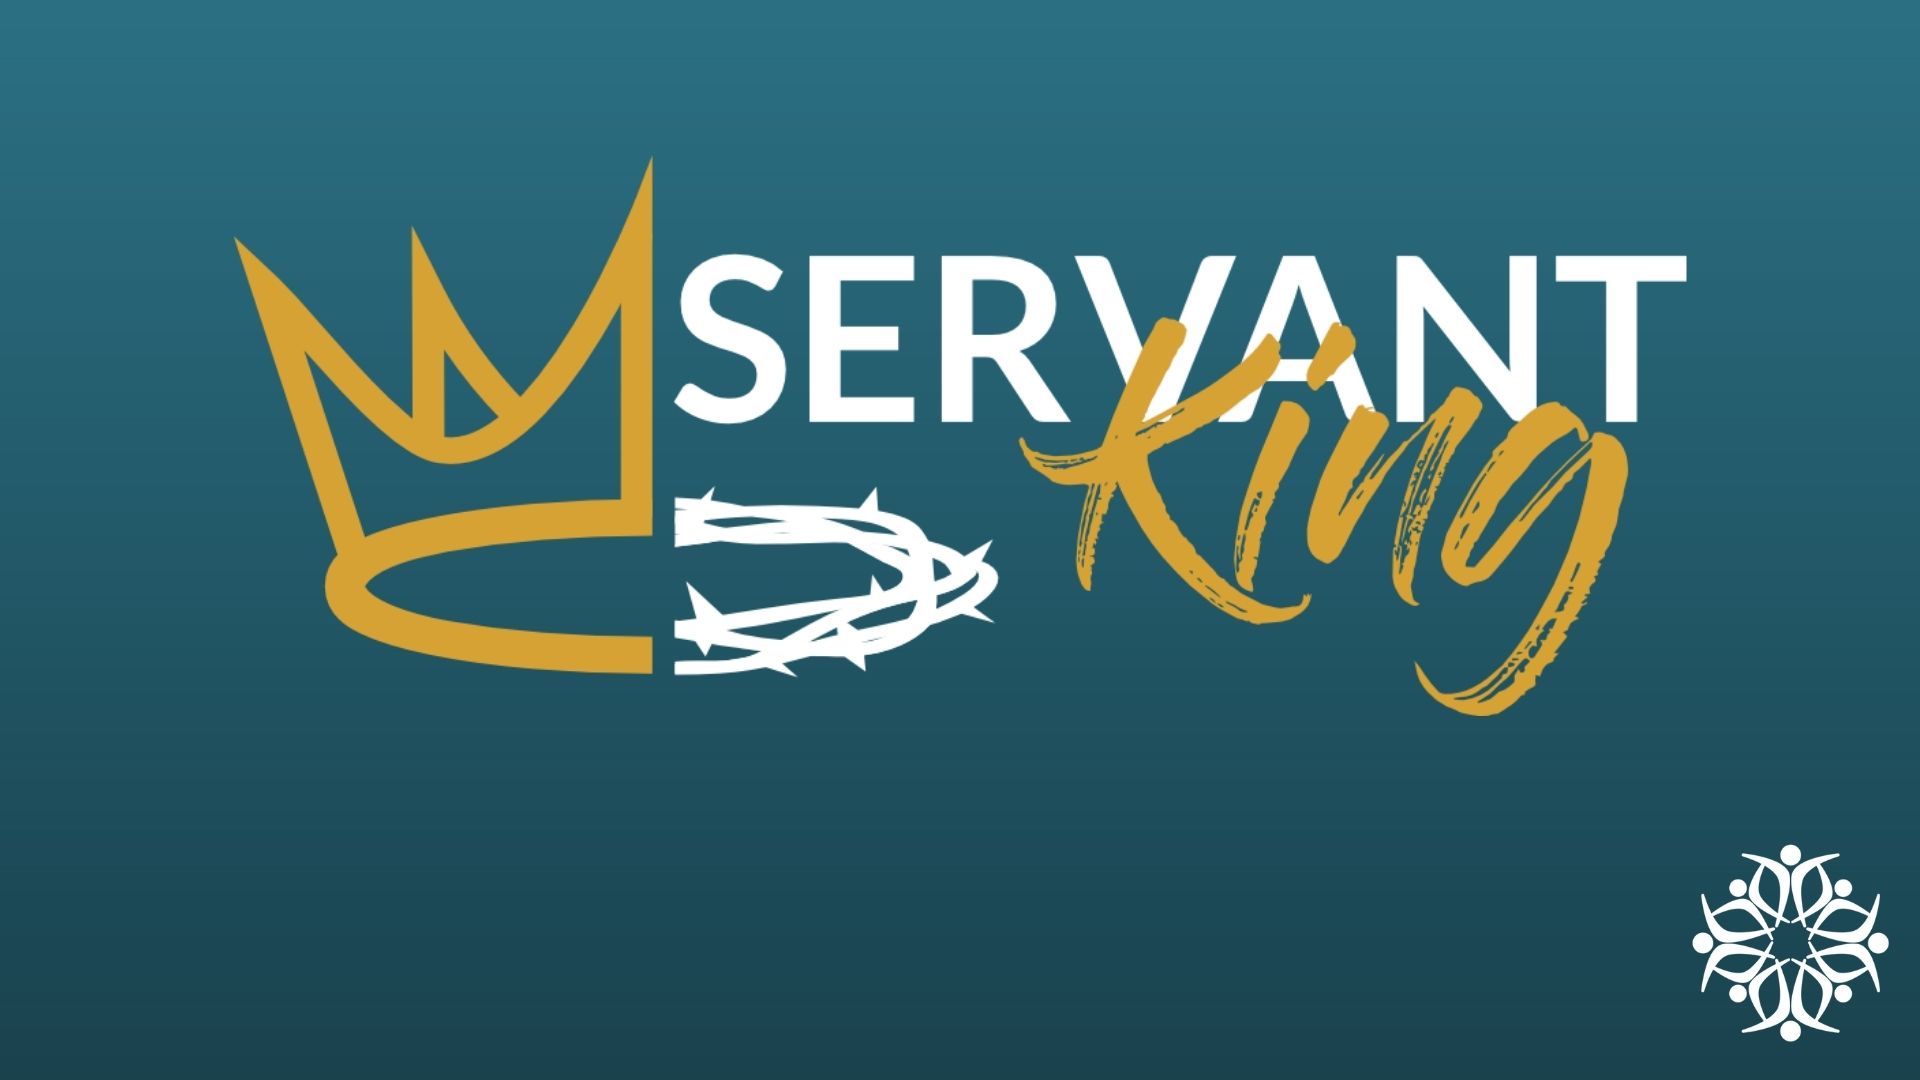 The Servant King’s Powerful Preaching